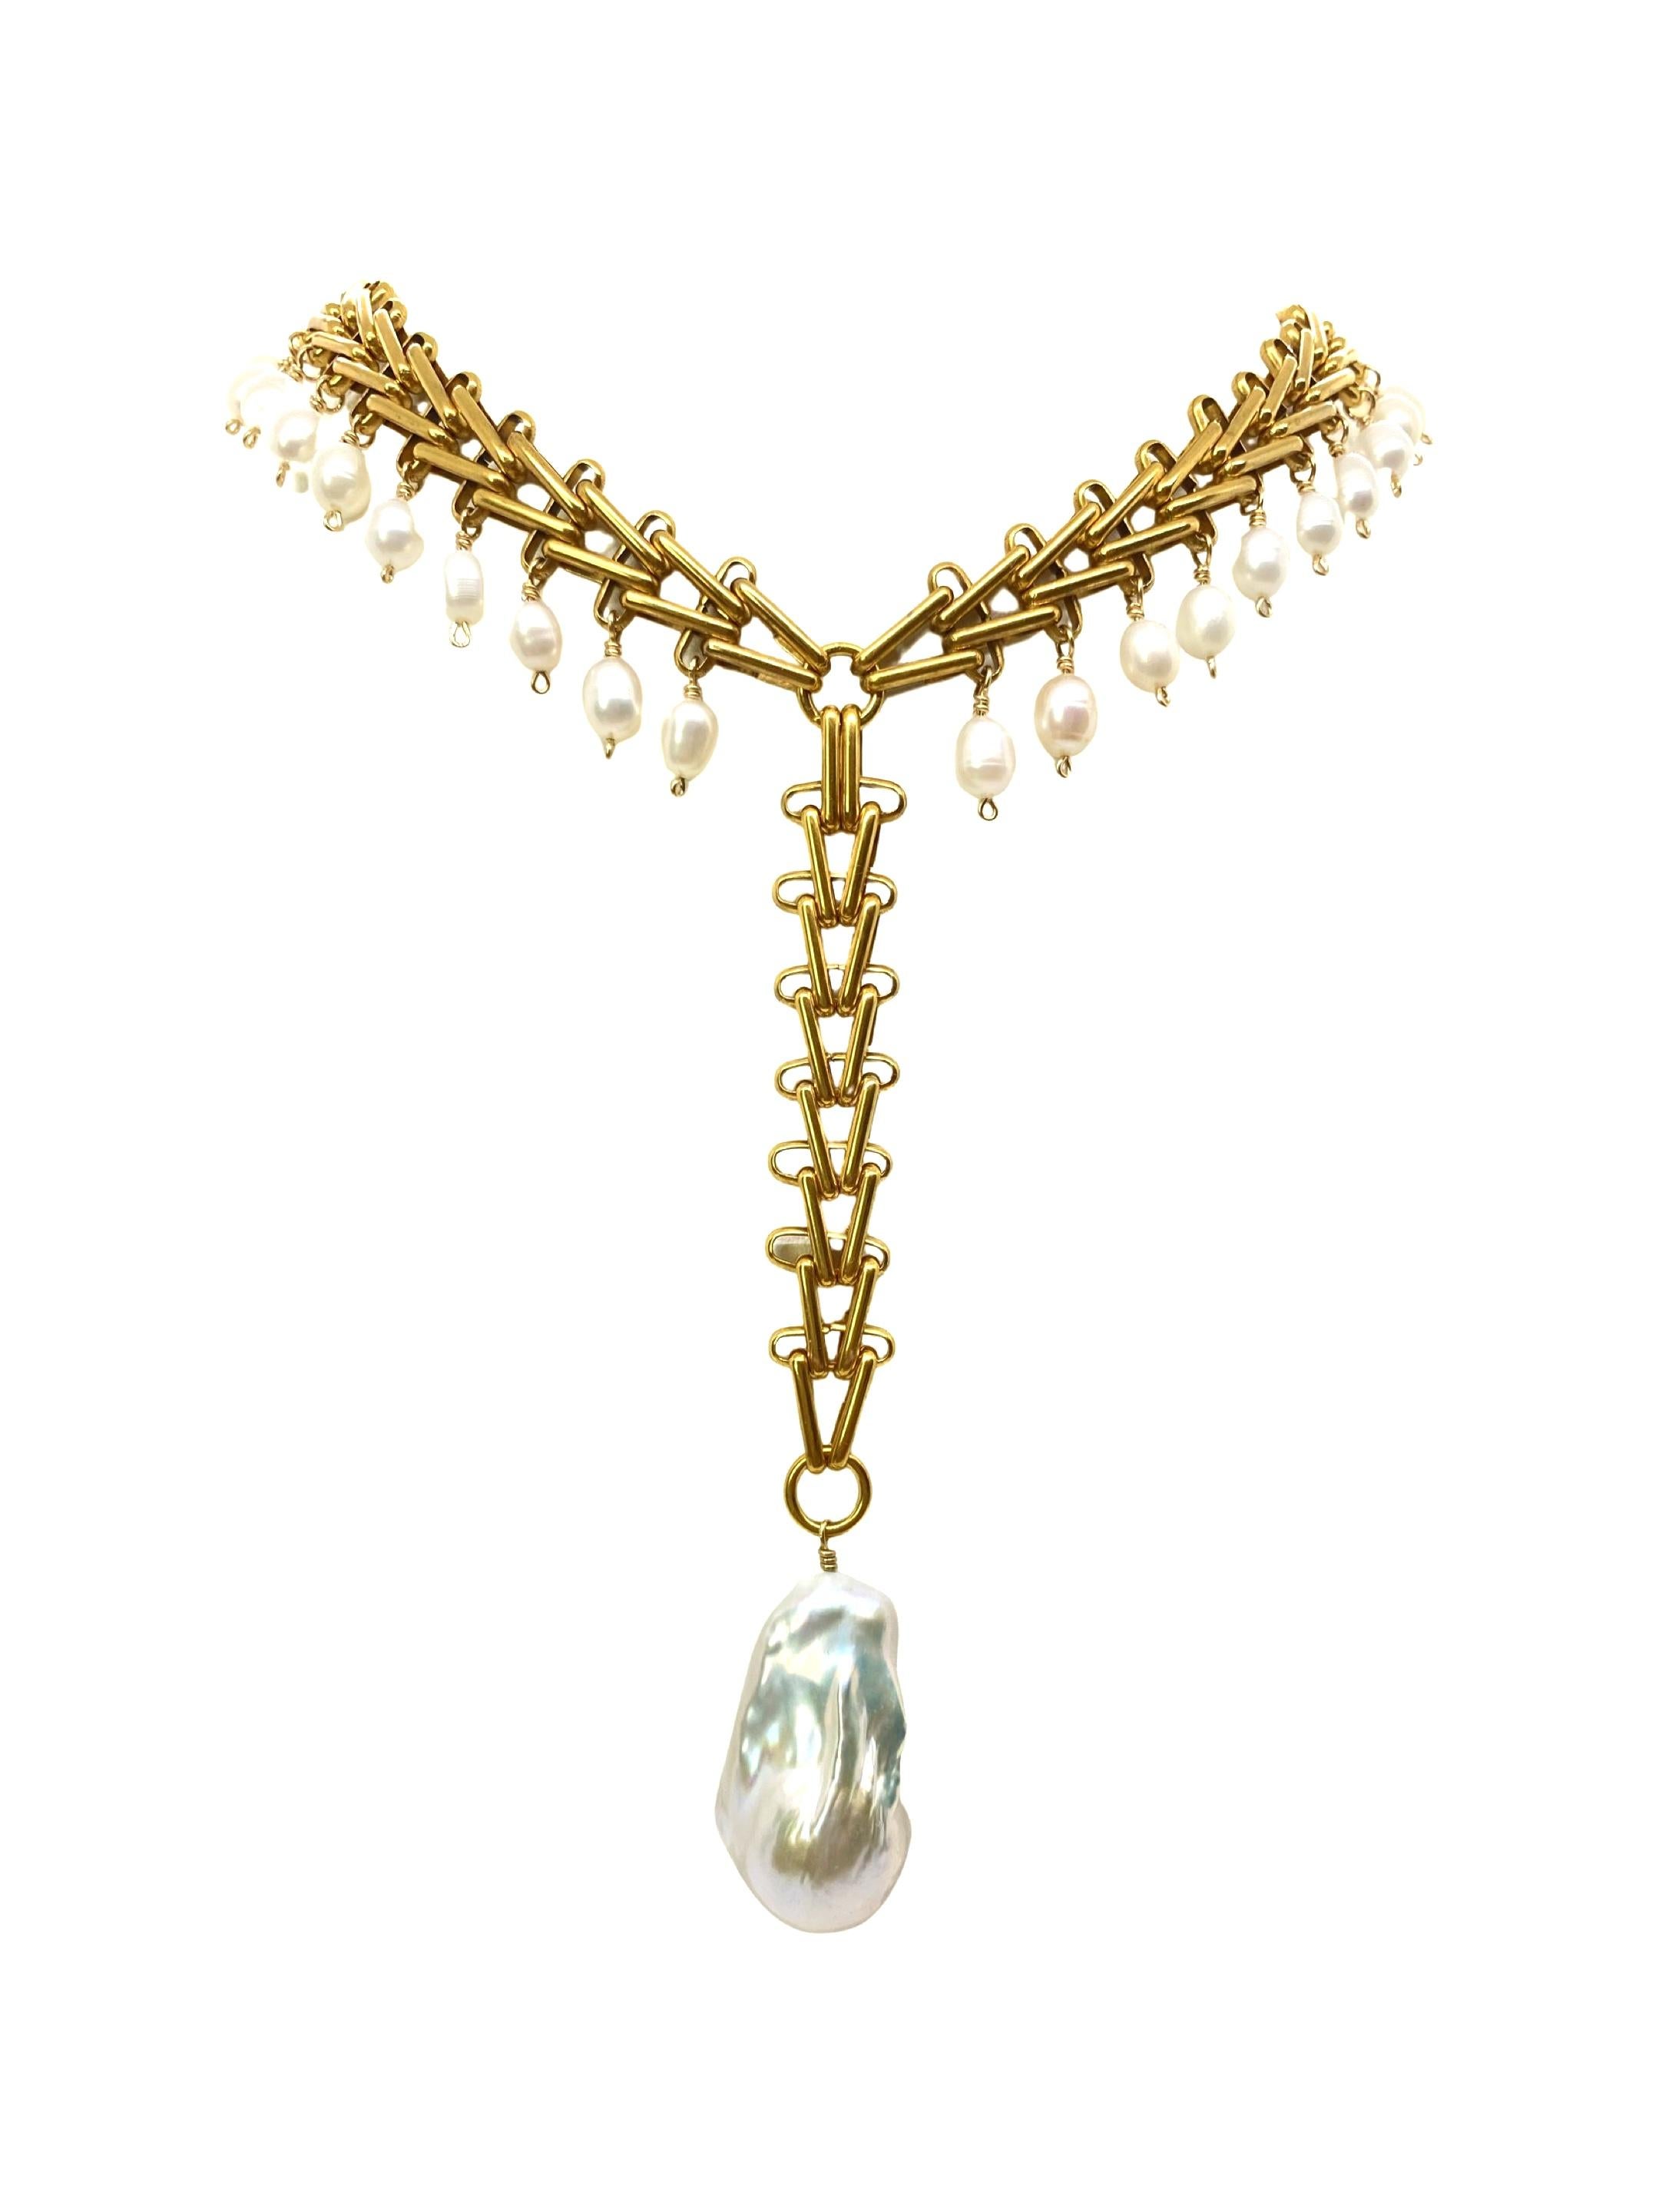 The Victoria necklace. V shaped chain necklace adorned with freshwater pearls and a large unique shape baroque pearl provides a dramatic statement to any outfit. 

Please note that no two pearls are exactly alike. Size, shape and color will vary in